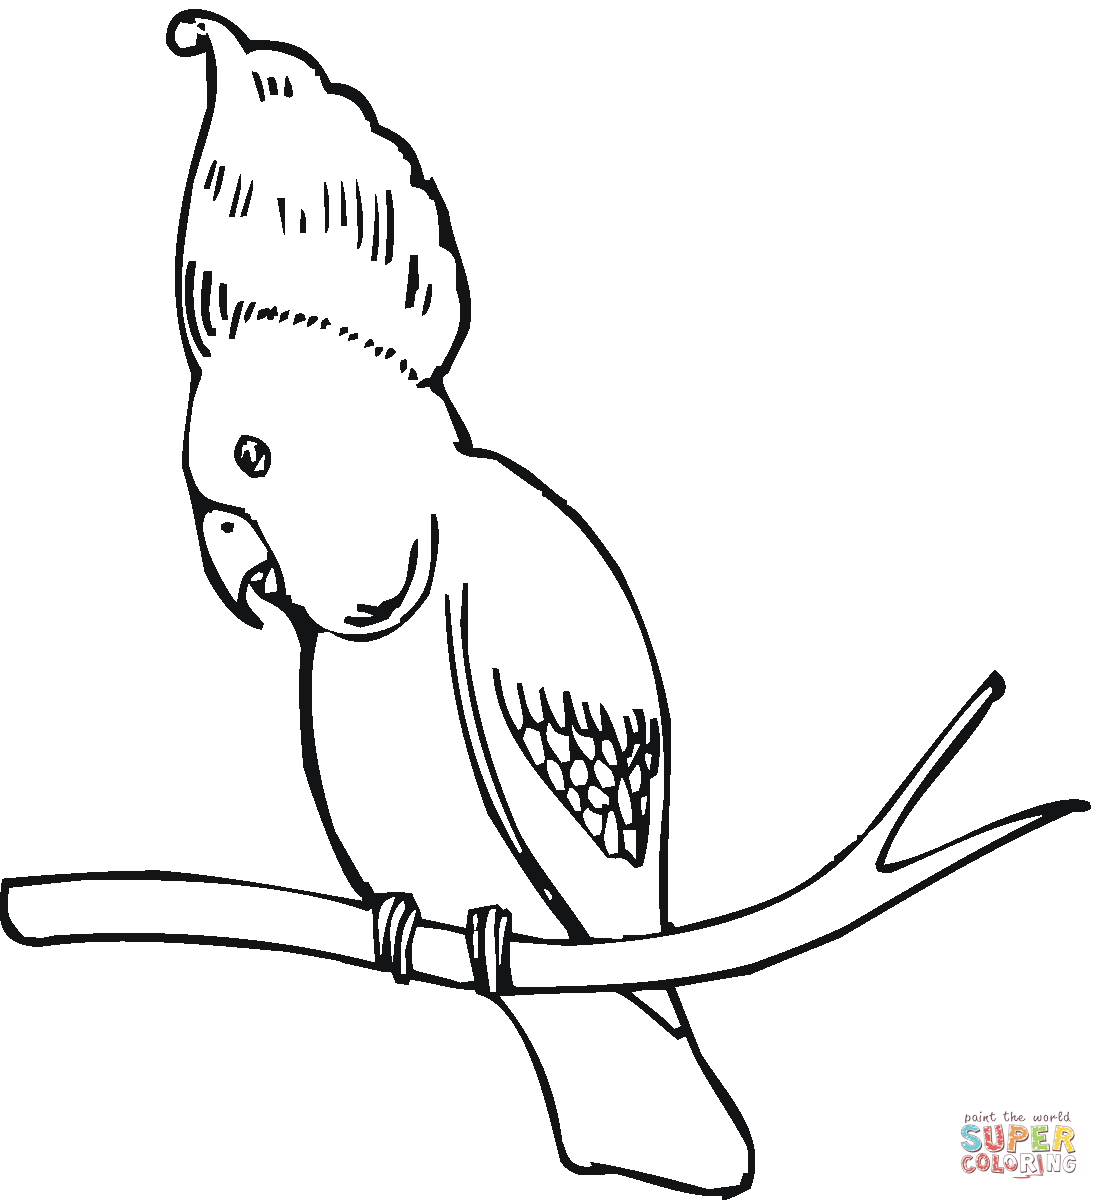 Major Mitchell's Cockatoo coloring #17, Download drawings